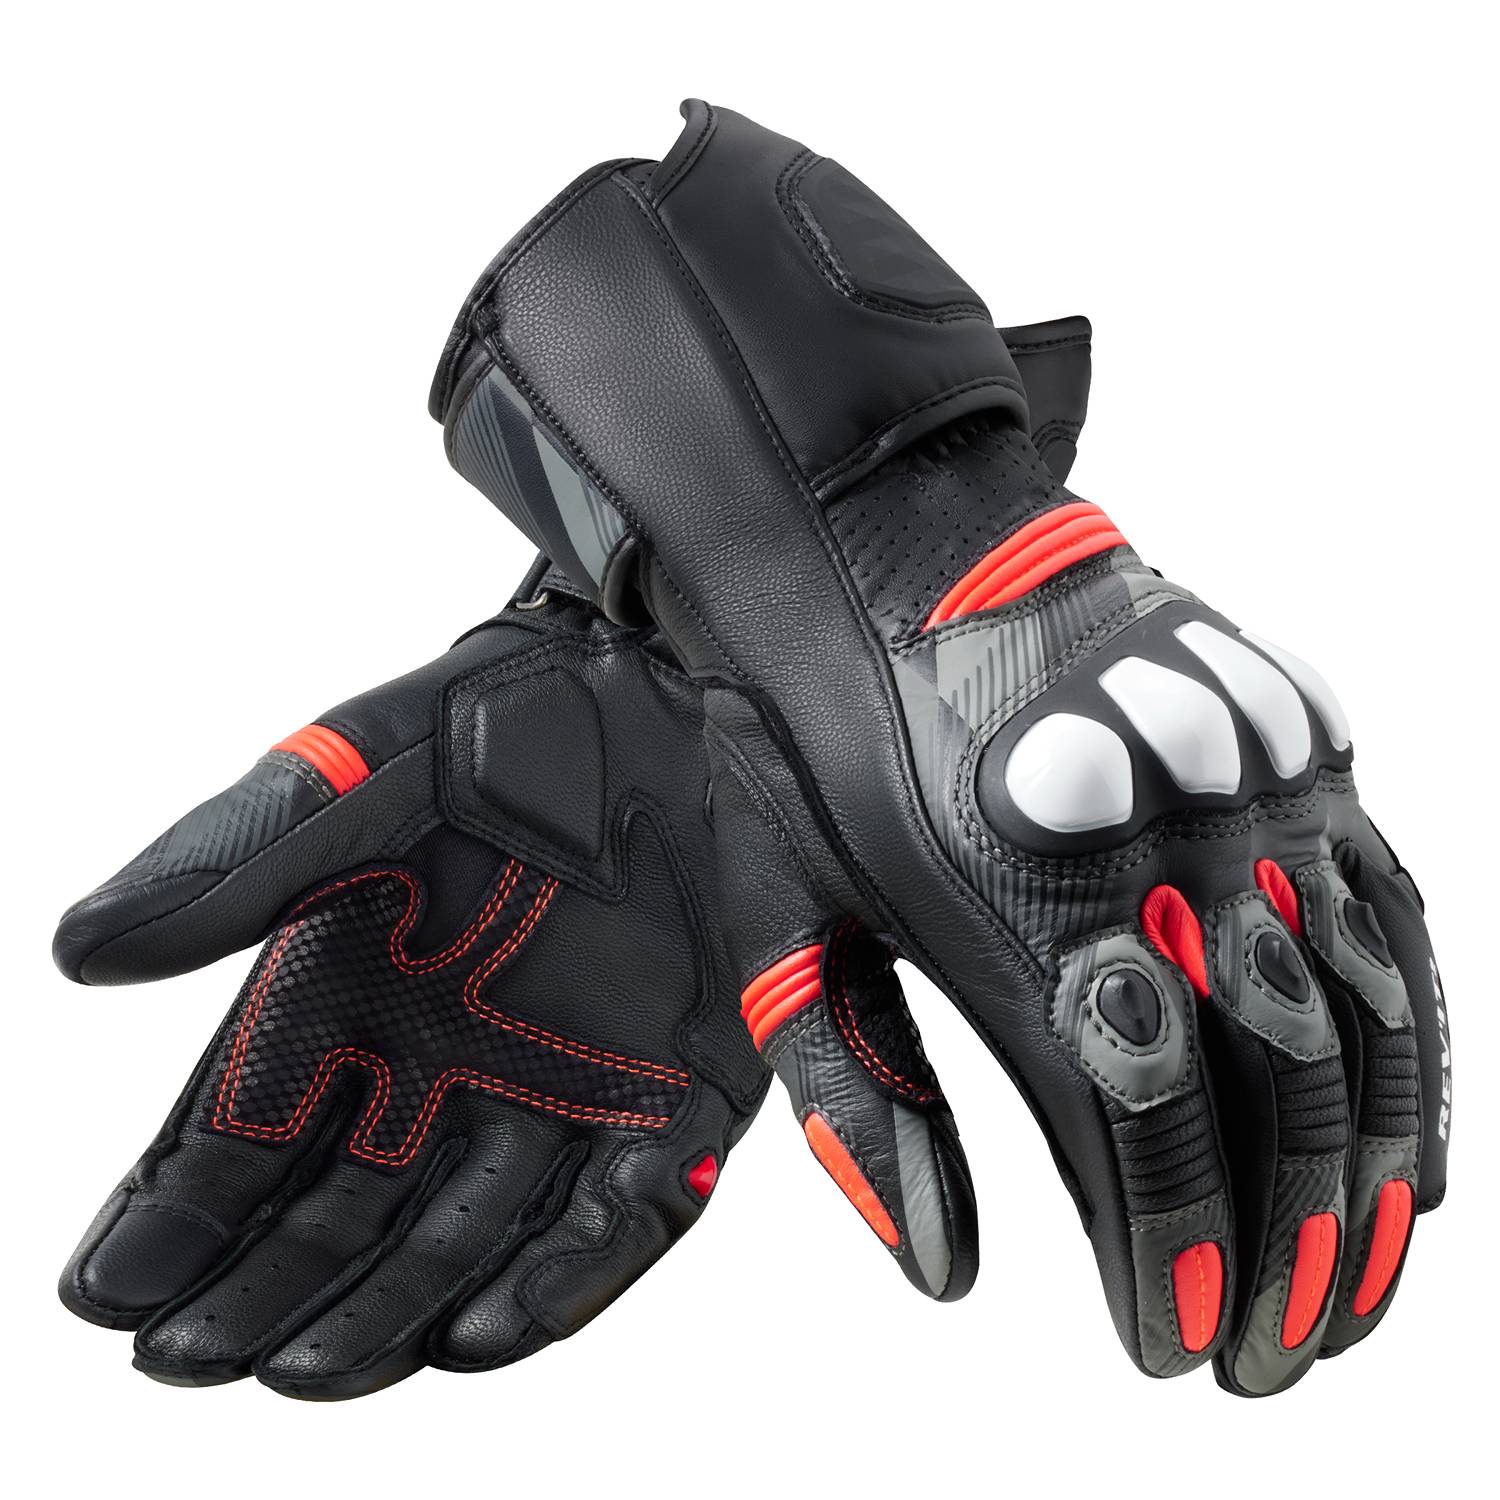 Image of REV'IT! League 2 Gloves Black Neon Red Size 2XL ID 8700001360760